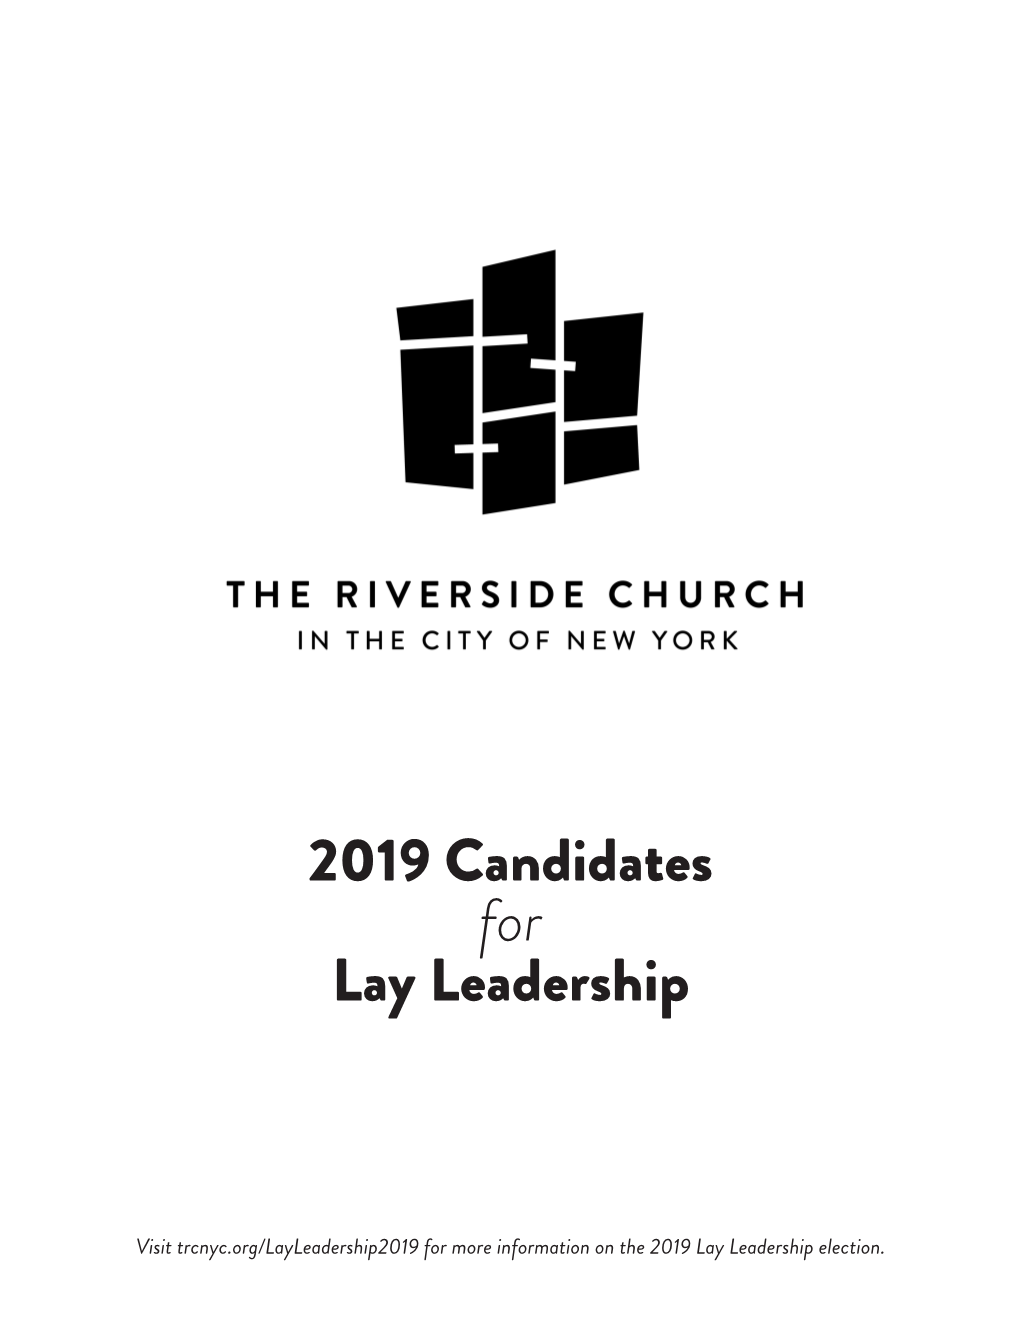 2019 Candidates for Lay Leadership